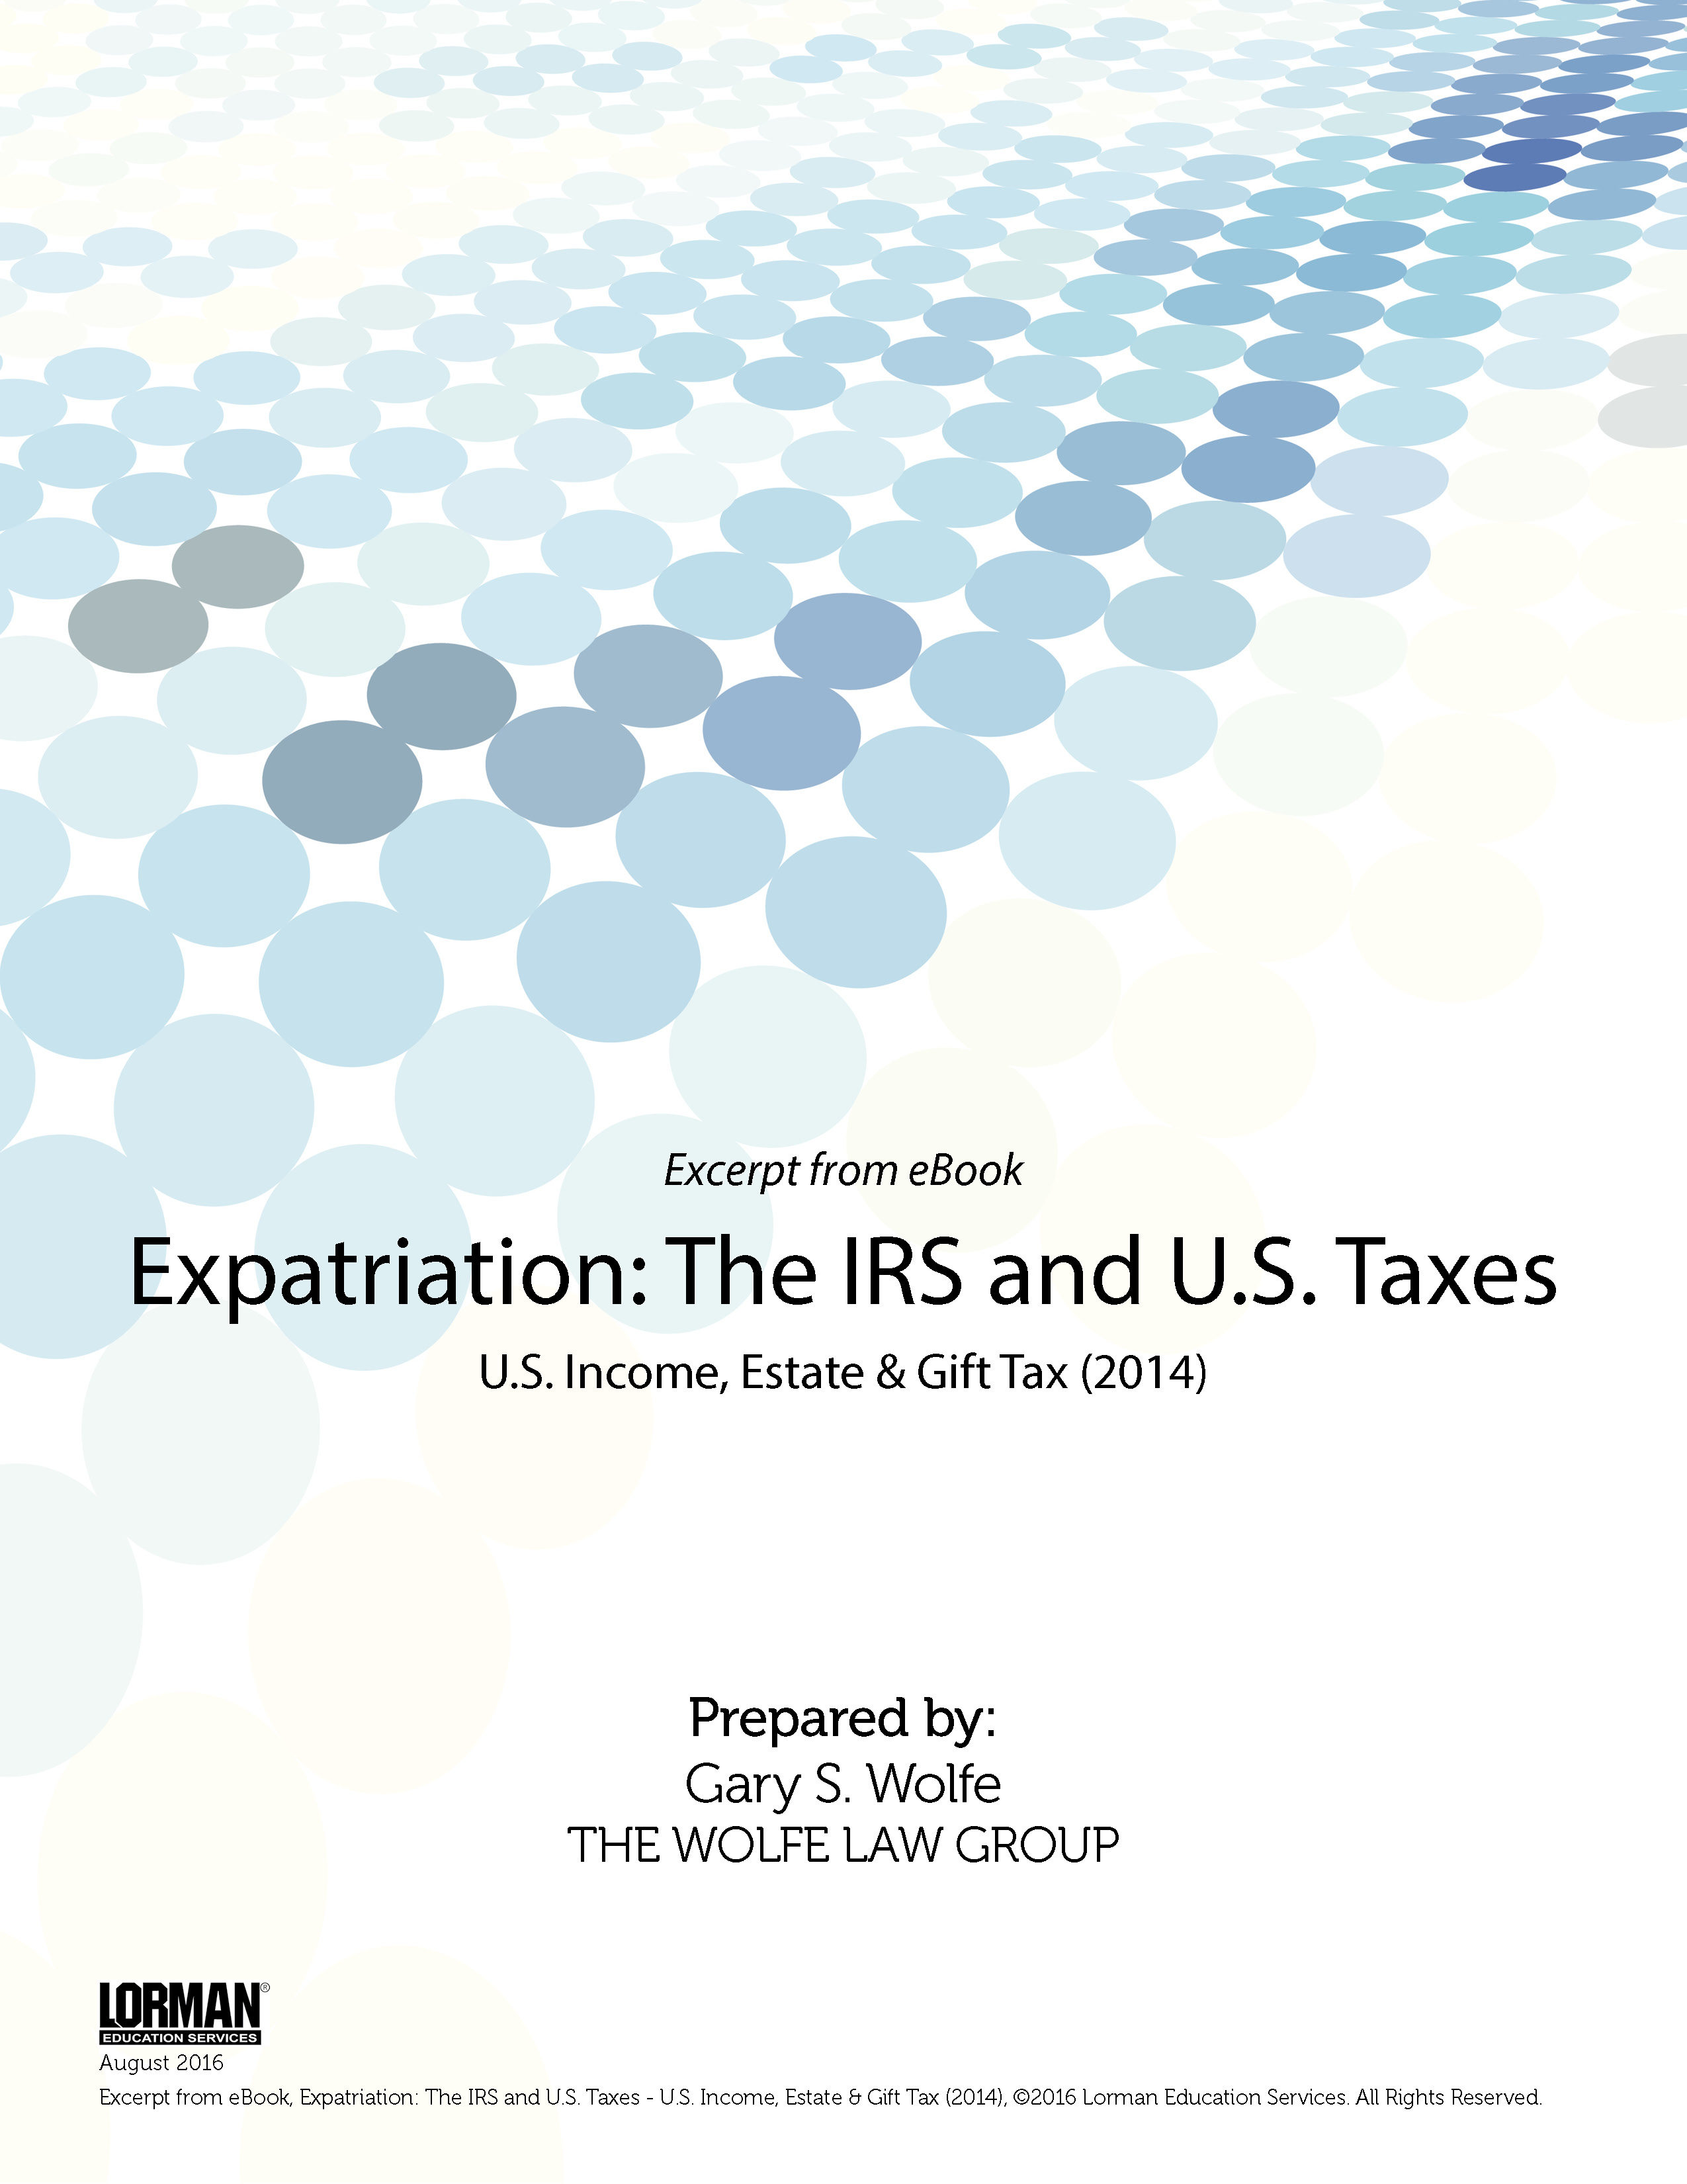 Expatriation - The IRS and U.S. Taxes - U.S. Income, Estate and Gift Tax (2014)